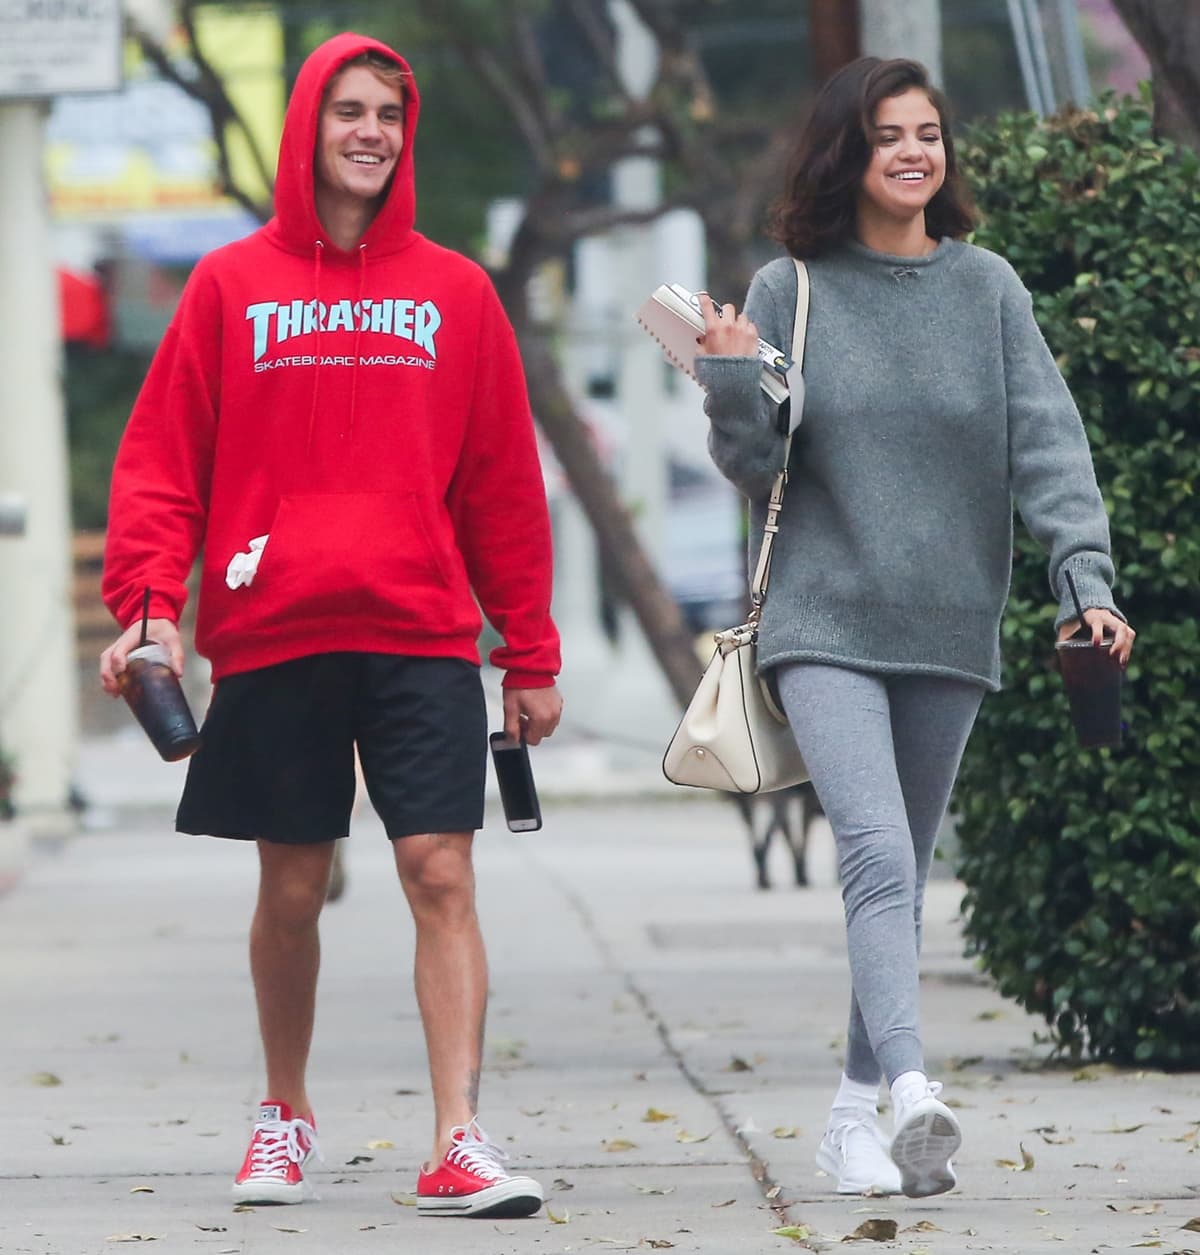 Justin Bieber and Selena Gomez were an on-and-off couple from 2010 to 2018